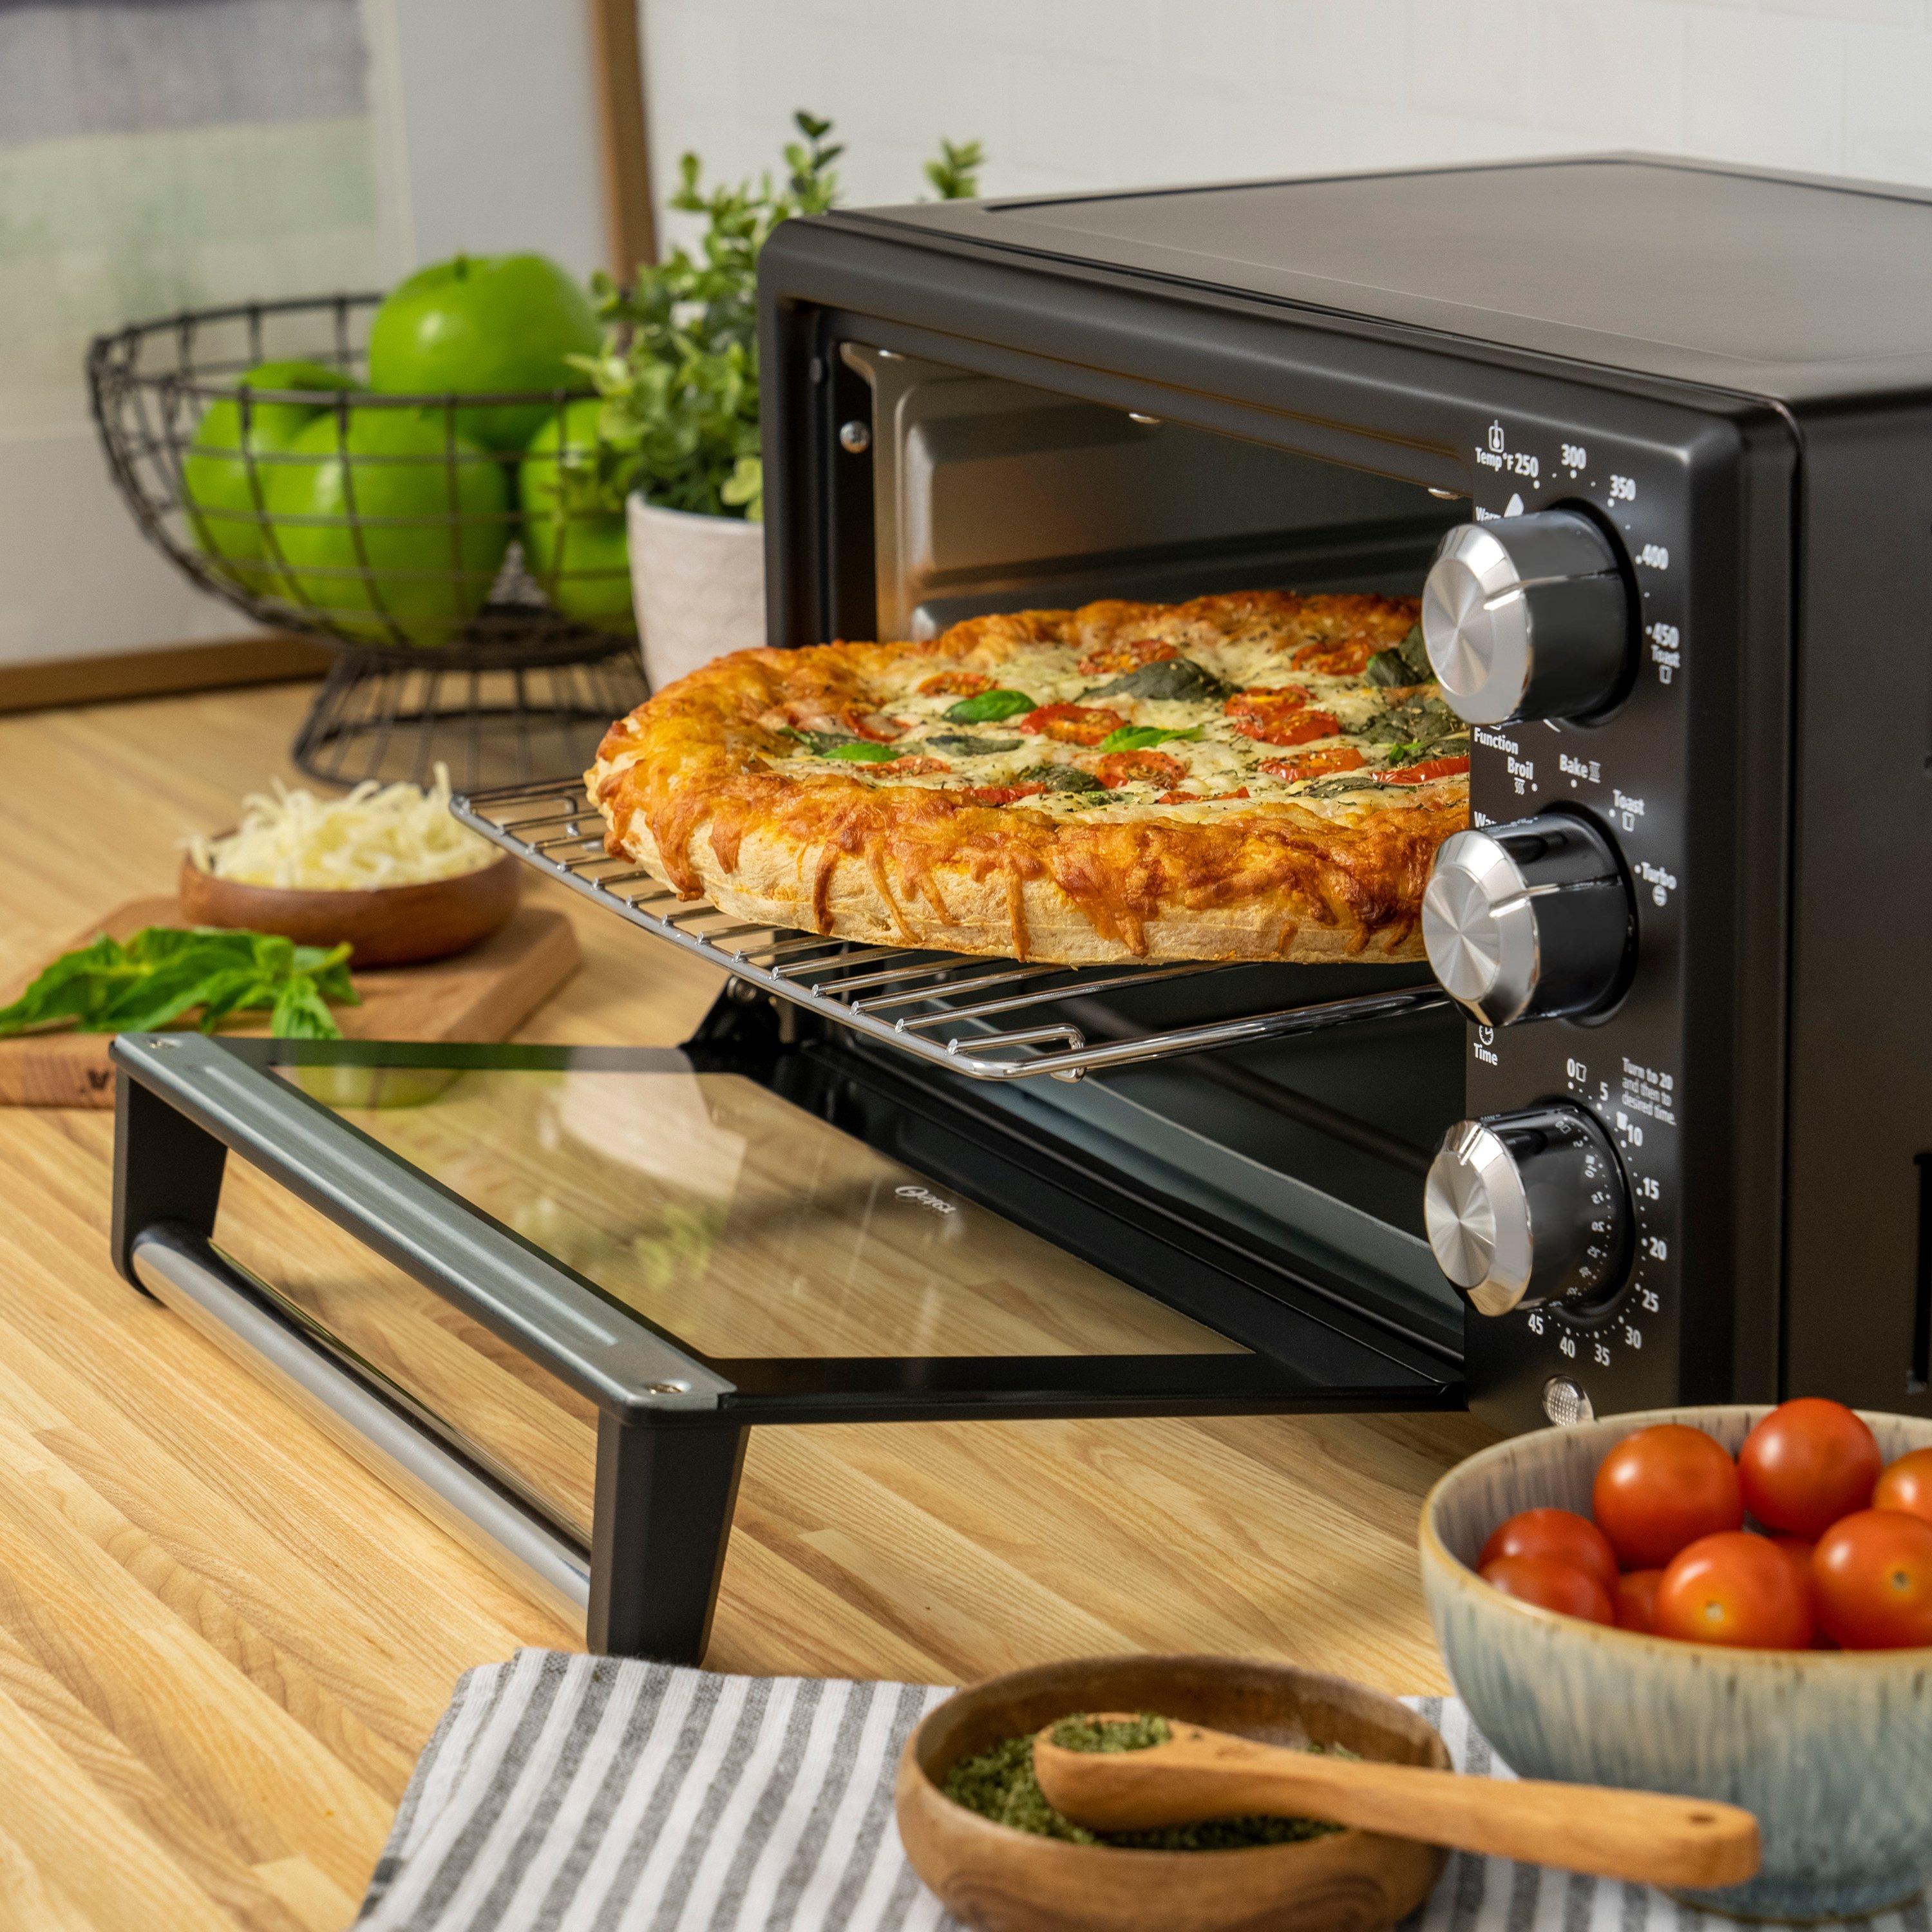 Oster Extra Large Convection Oven Review: Well Worth the Money